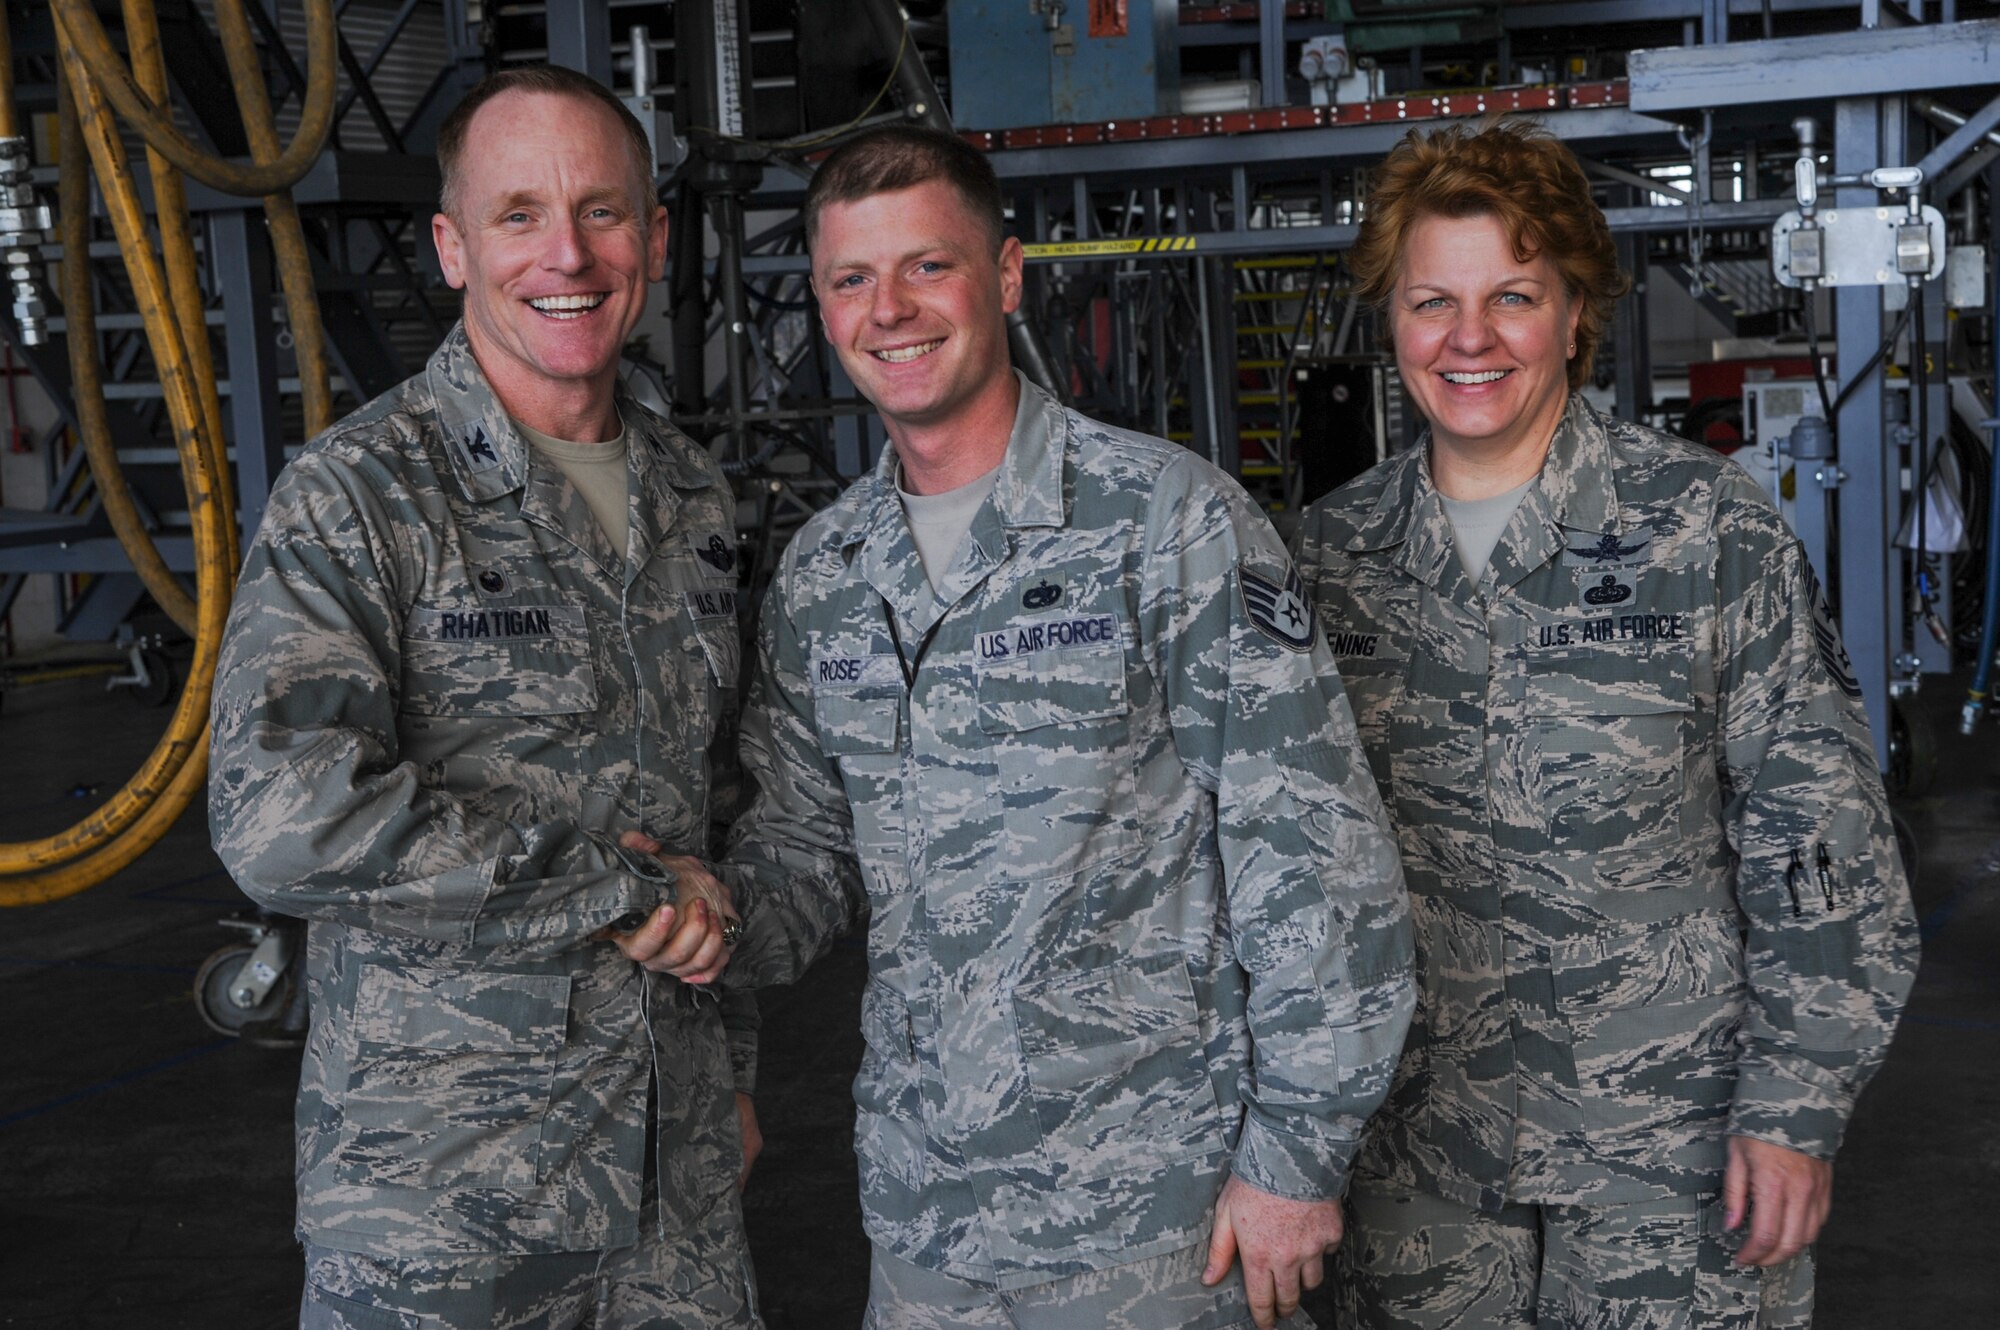 Col. Patrick Rhatigan, 19th Airlift Wing commander, and Chief Master Sgt. Rhonda Buening, 19th AW command chief, congratulate Staff Sgt. Corey Rose, a 19th Maintenance Squadron C-130 aerospace propulsion craftsman, for his selection as Combat Airlifter of the Week March 16, 2015, at Little Rock Air Force Base, Ark. Rose, a Hope, Ark. native, ensured approximately 250 maintenance tasks were completed correctly and efficiently during C-130 inspections. (U.S. Air Force photo by Airman 1st Class Harry Brexel) 